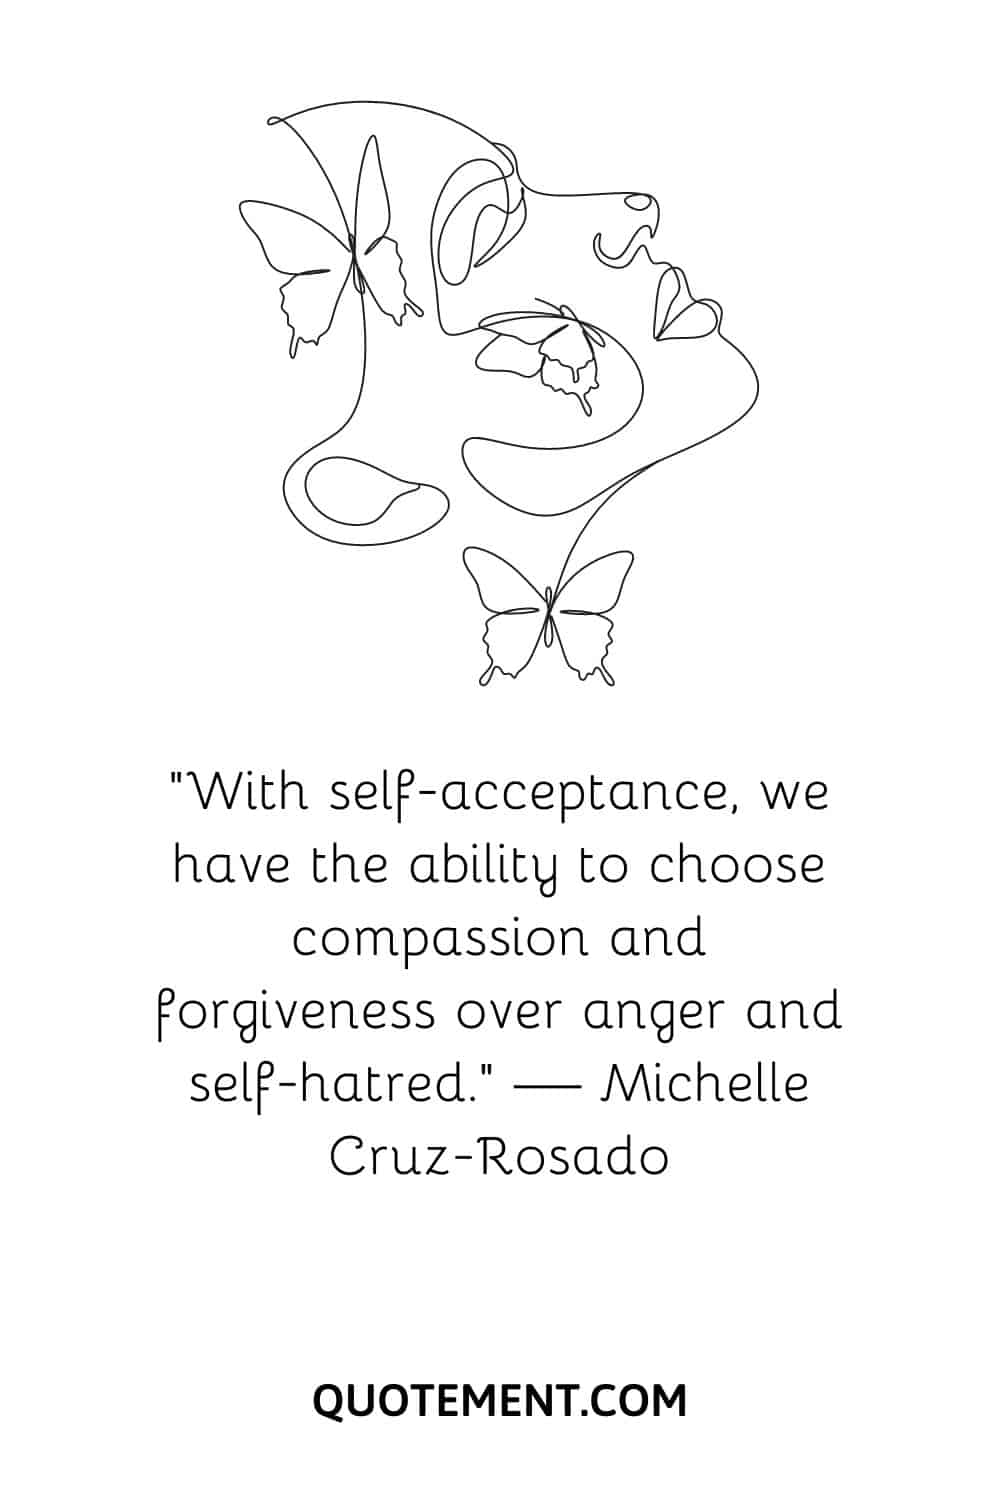 “With self-acceptance, we have the ability to choose compassion and forgiveness over anger and self-hatred.” — Michelle Cruz-Rosado